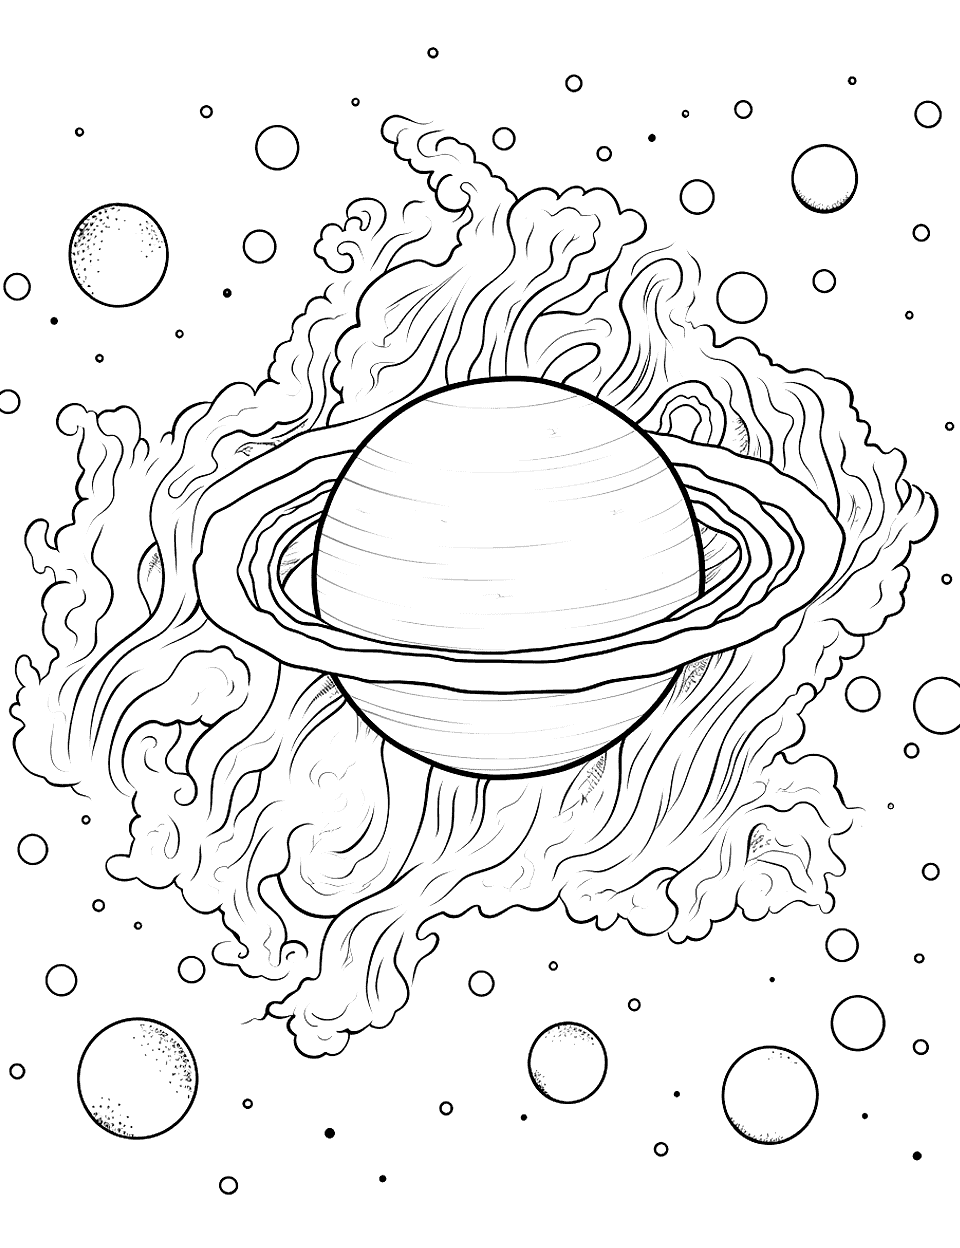 Orion Nebula Solar System Coloring Page - The Orion Nebula depicted with its gas and dust clouds.